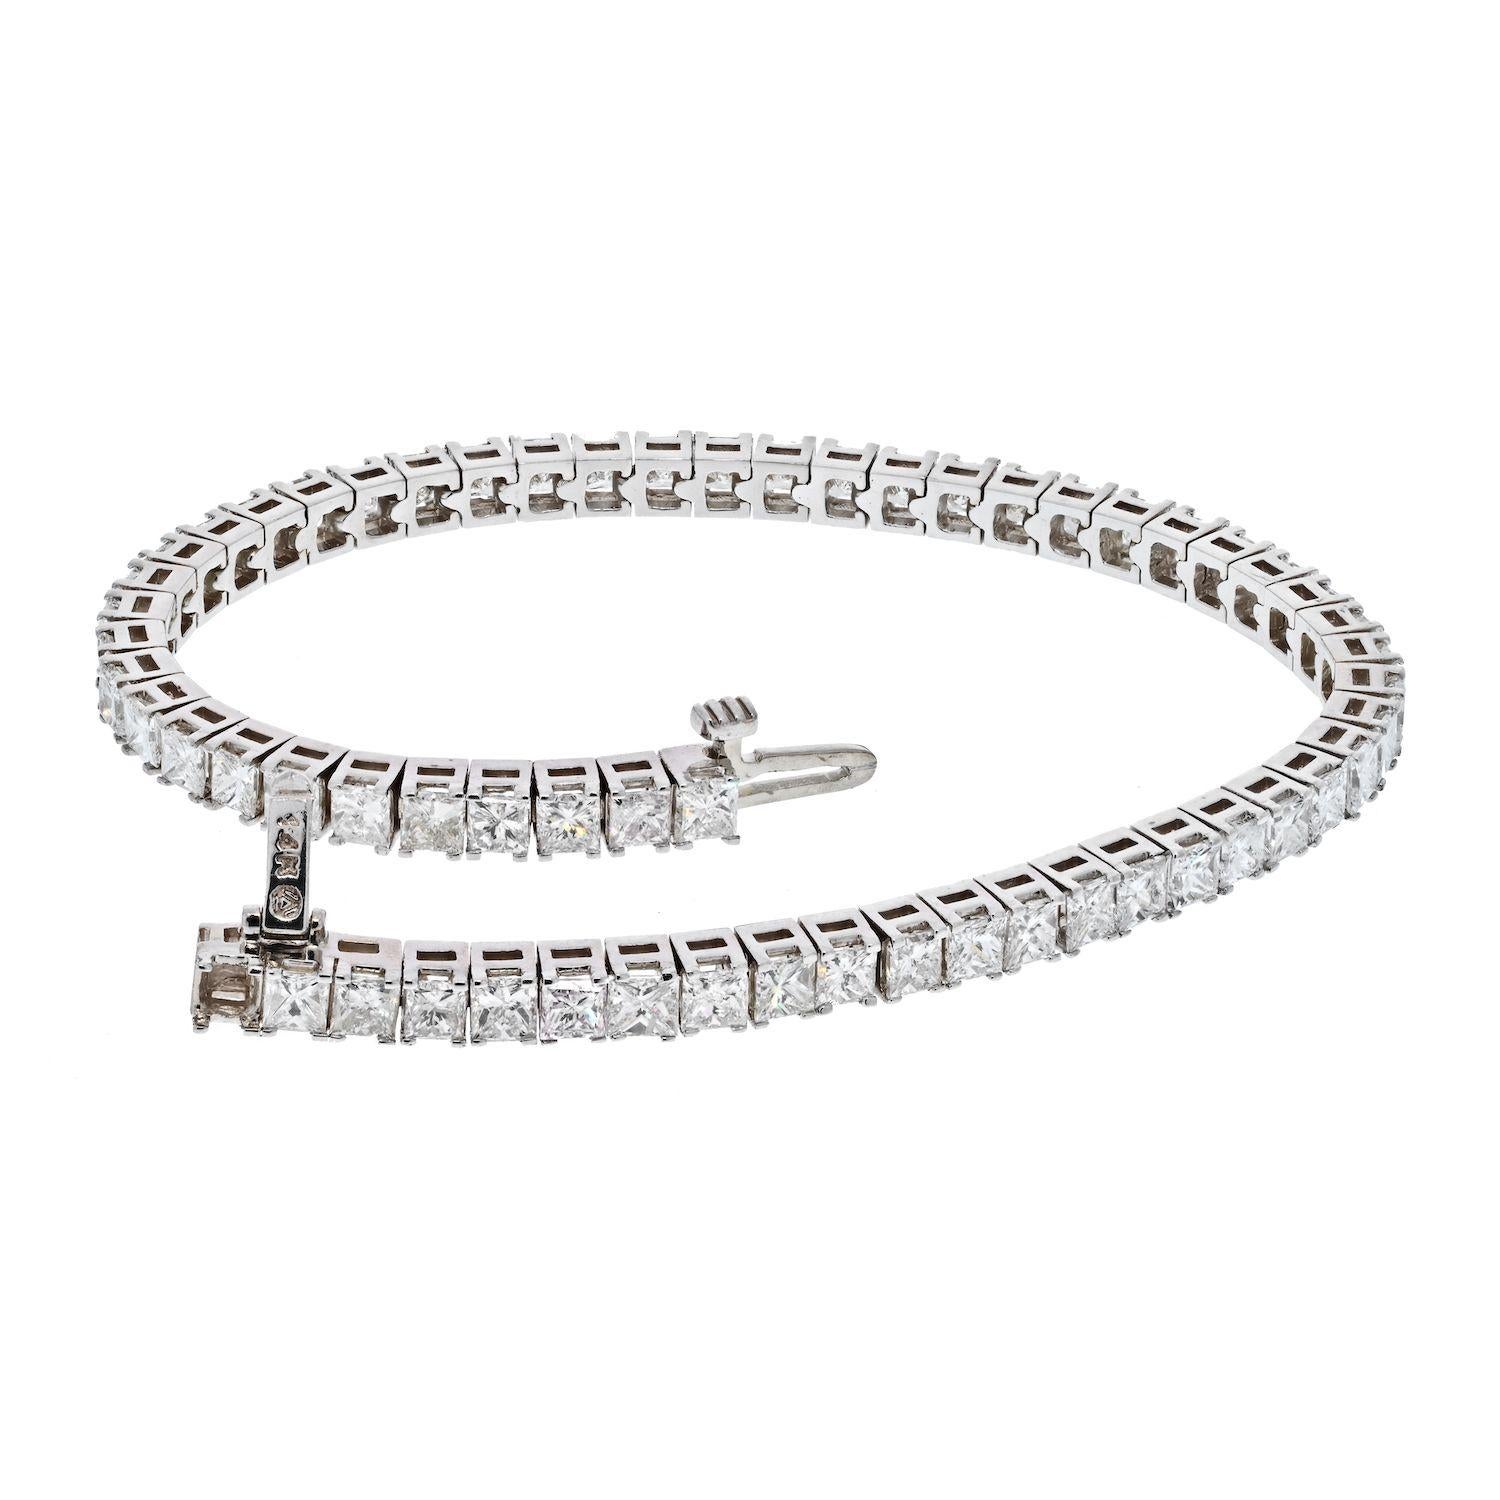 Made in 14K White Gold mounted with 7.70cts of princess cut diamonds, this is a perfect bracelet to wear day to night. 
7 inches long. 
Box closure with safety.
Can be shortened at your local jeweler. 